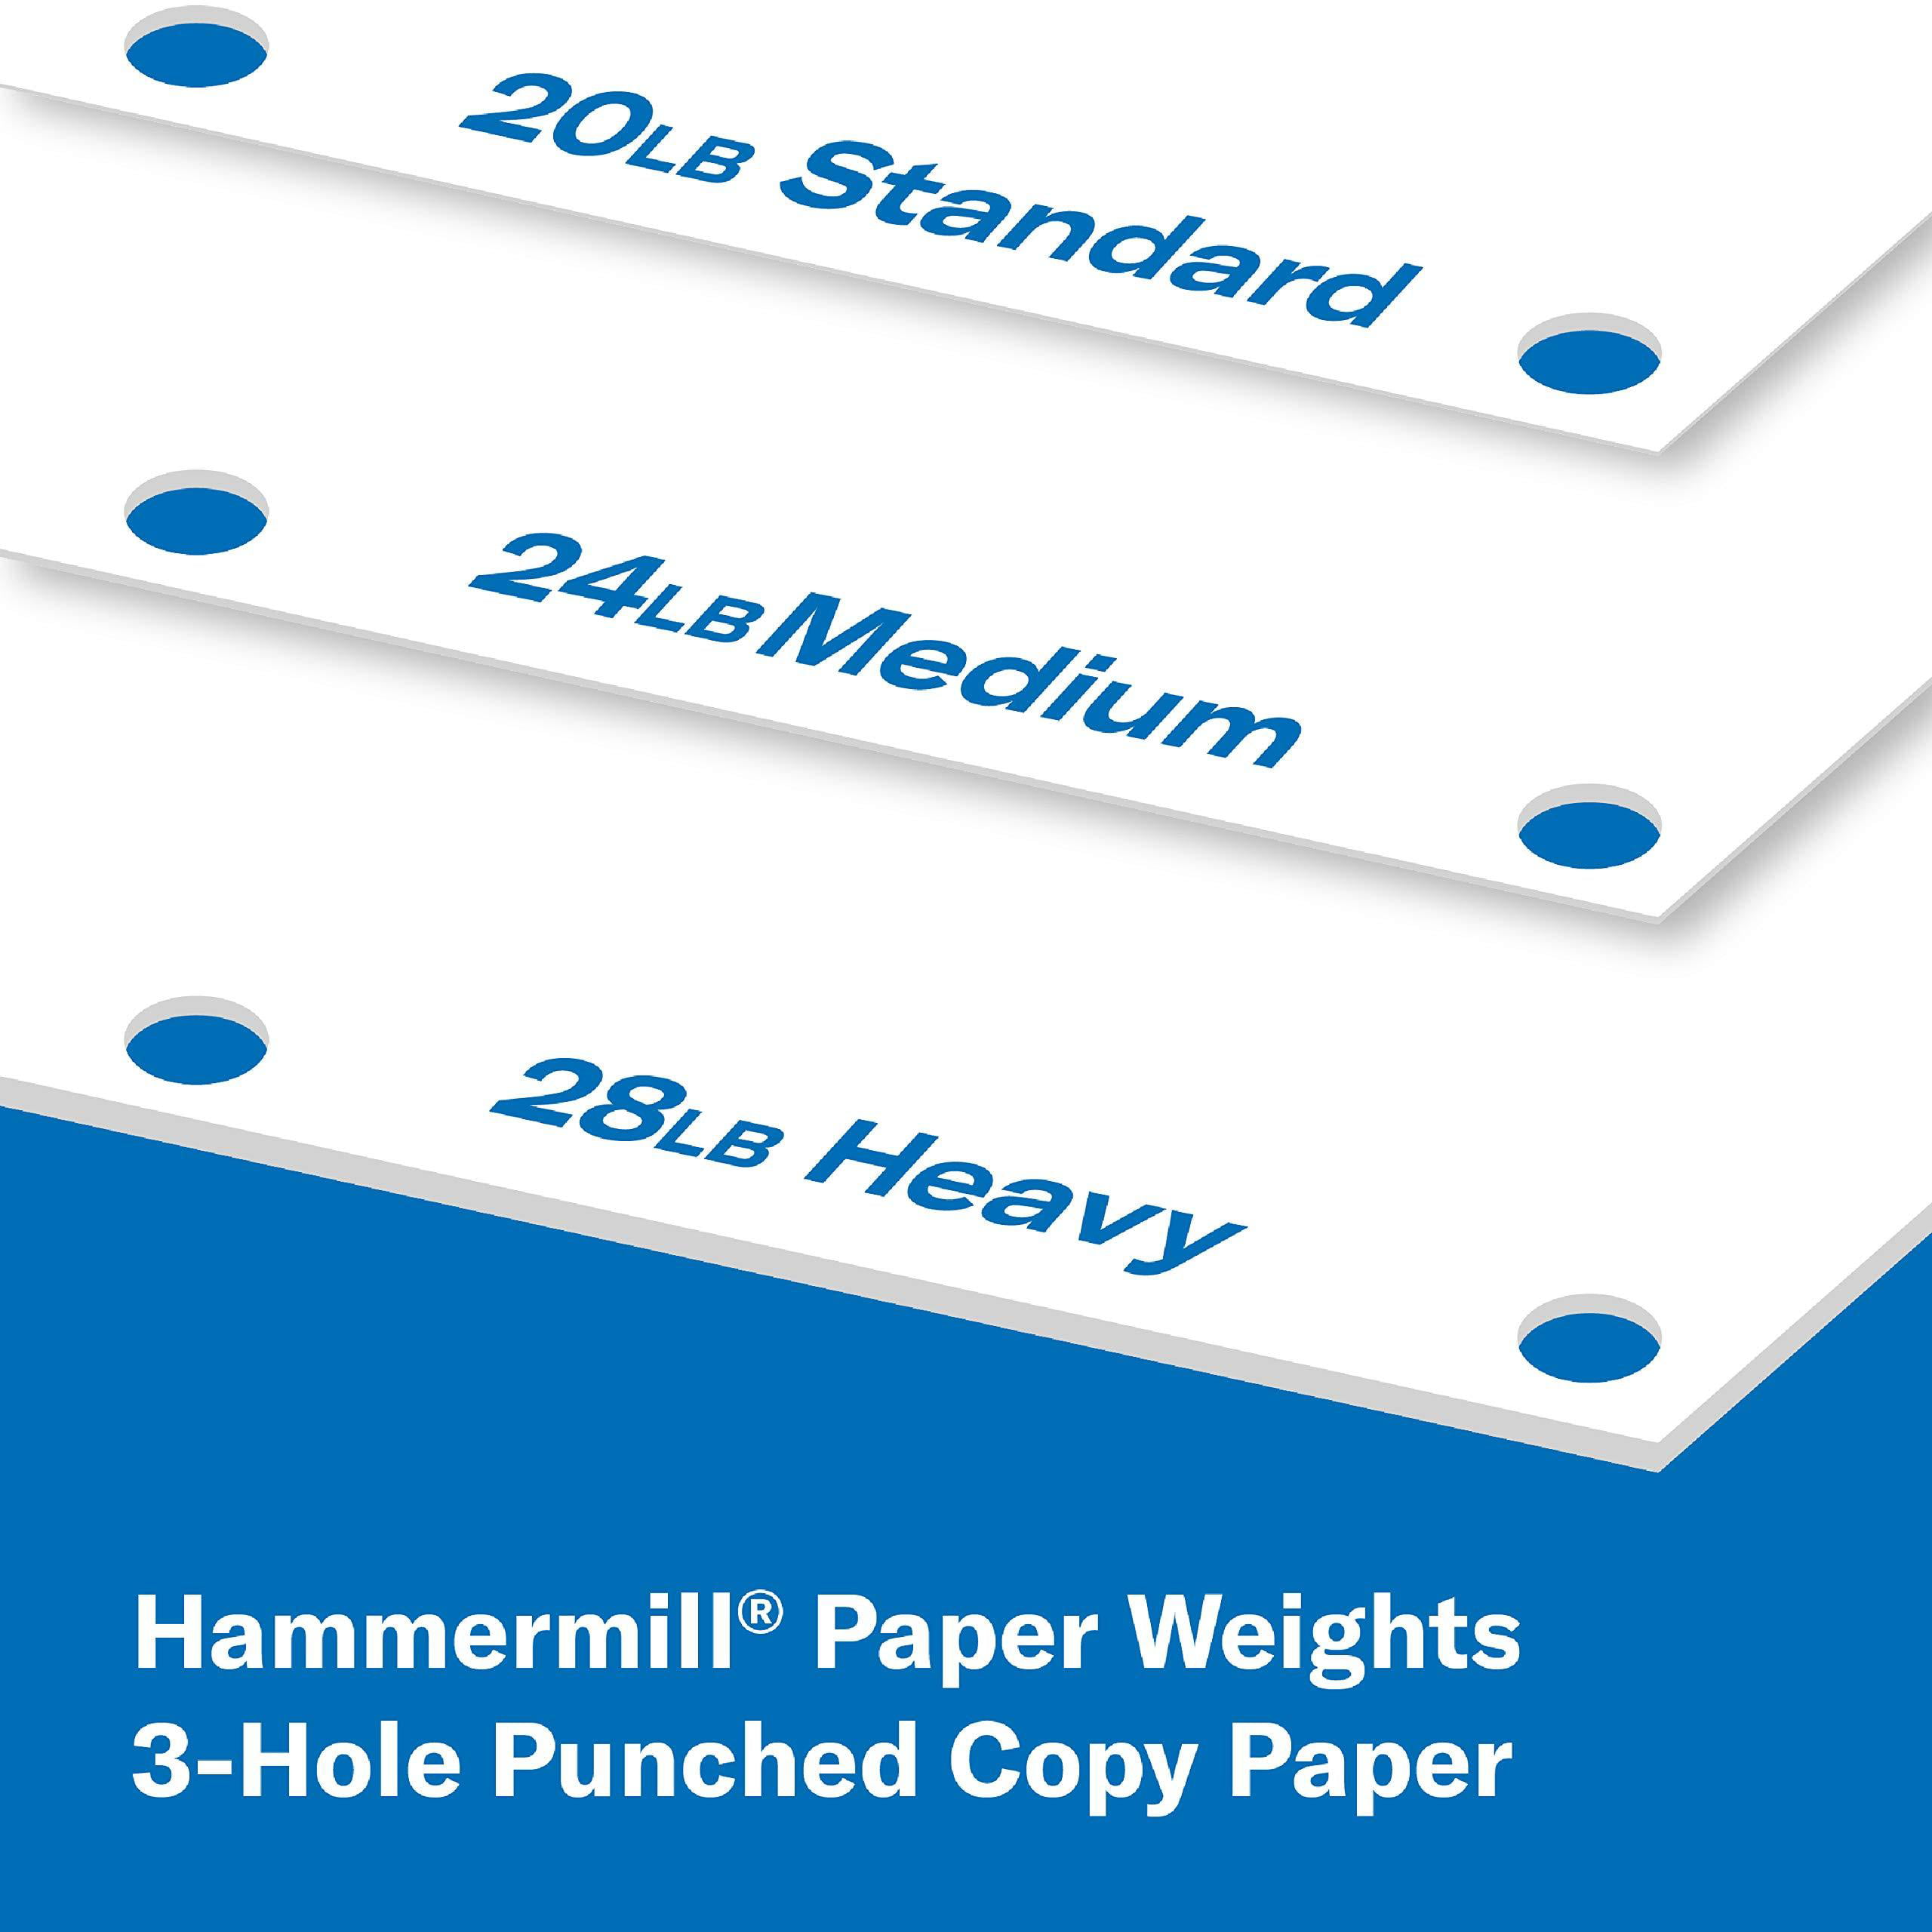 Hammermill® Great White 30 Recycled Print Paper, 92 Bright, 20lb Bond  Weight, 8.5 x 11, White, 500/Ream,10 Reams/Carton,40 Cartons/Pallet